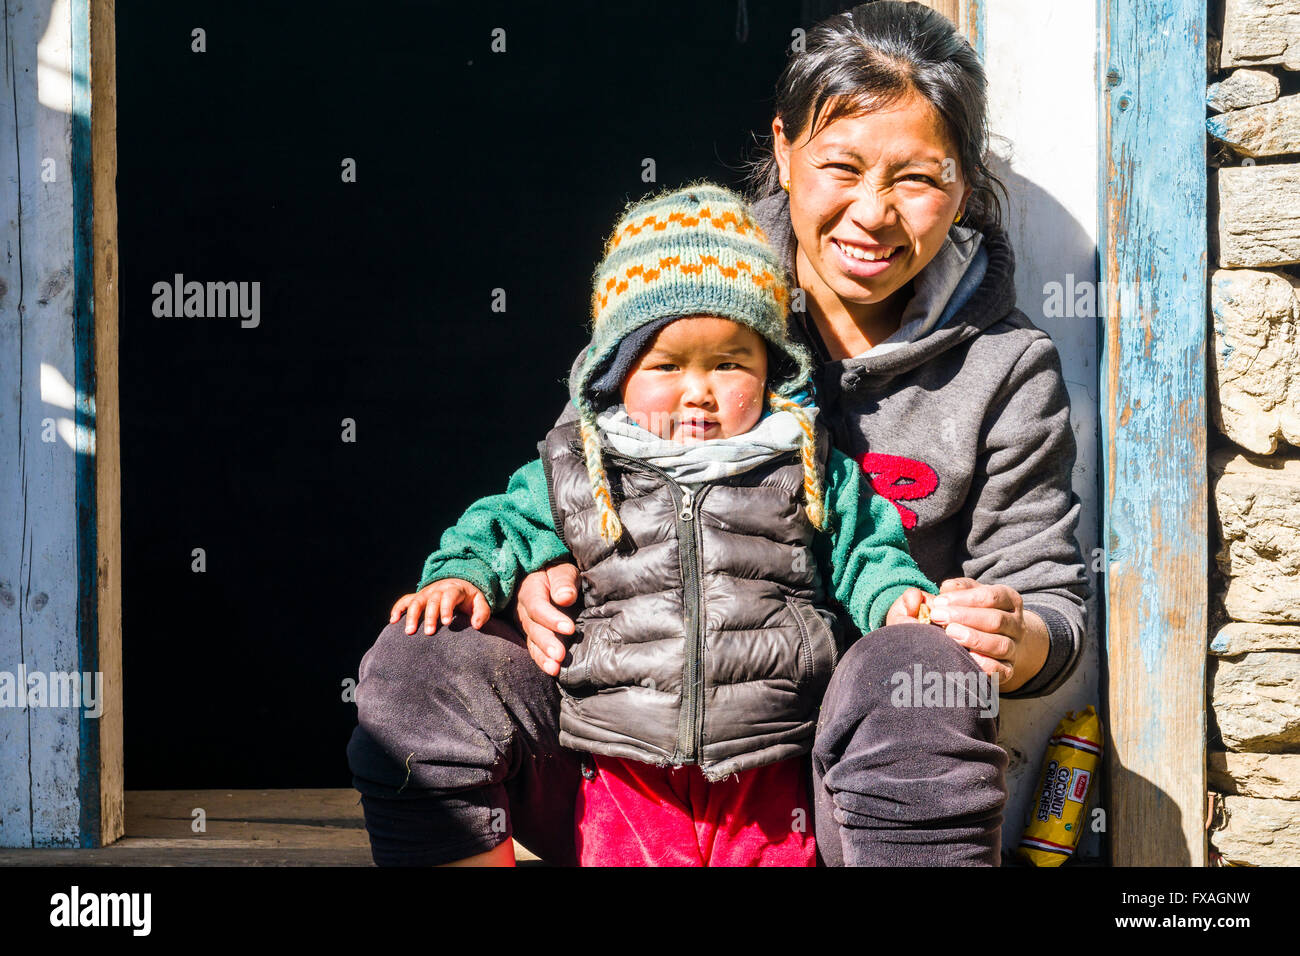 Portrait of a smiling young nepali mother with her child sitting in a doorway, Chheplung, Solo Khumbu, Nepal Stock Photo